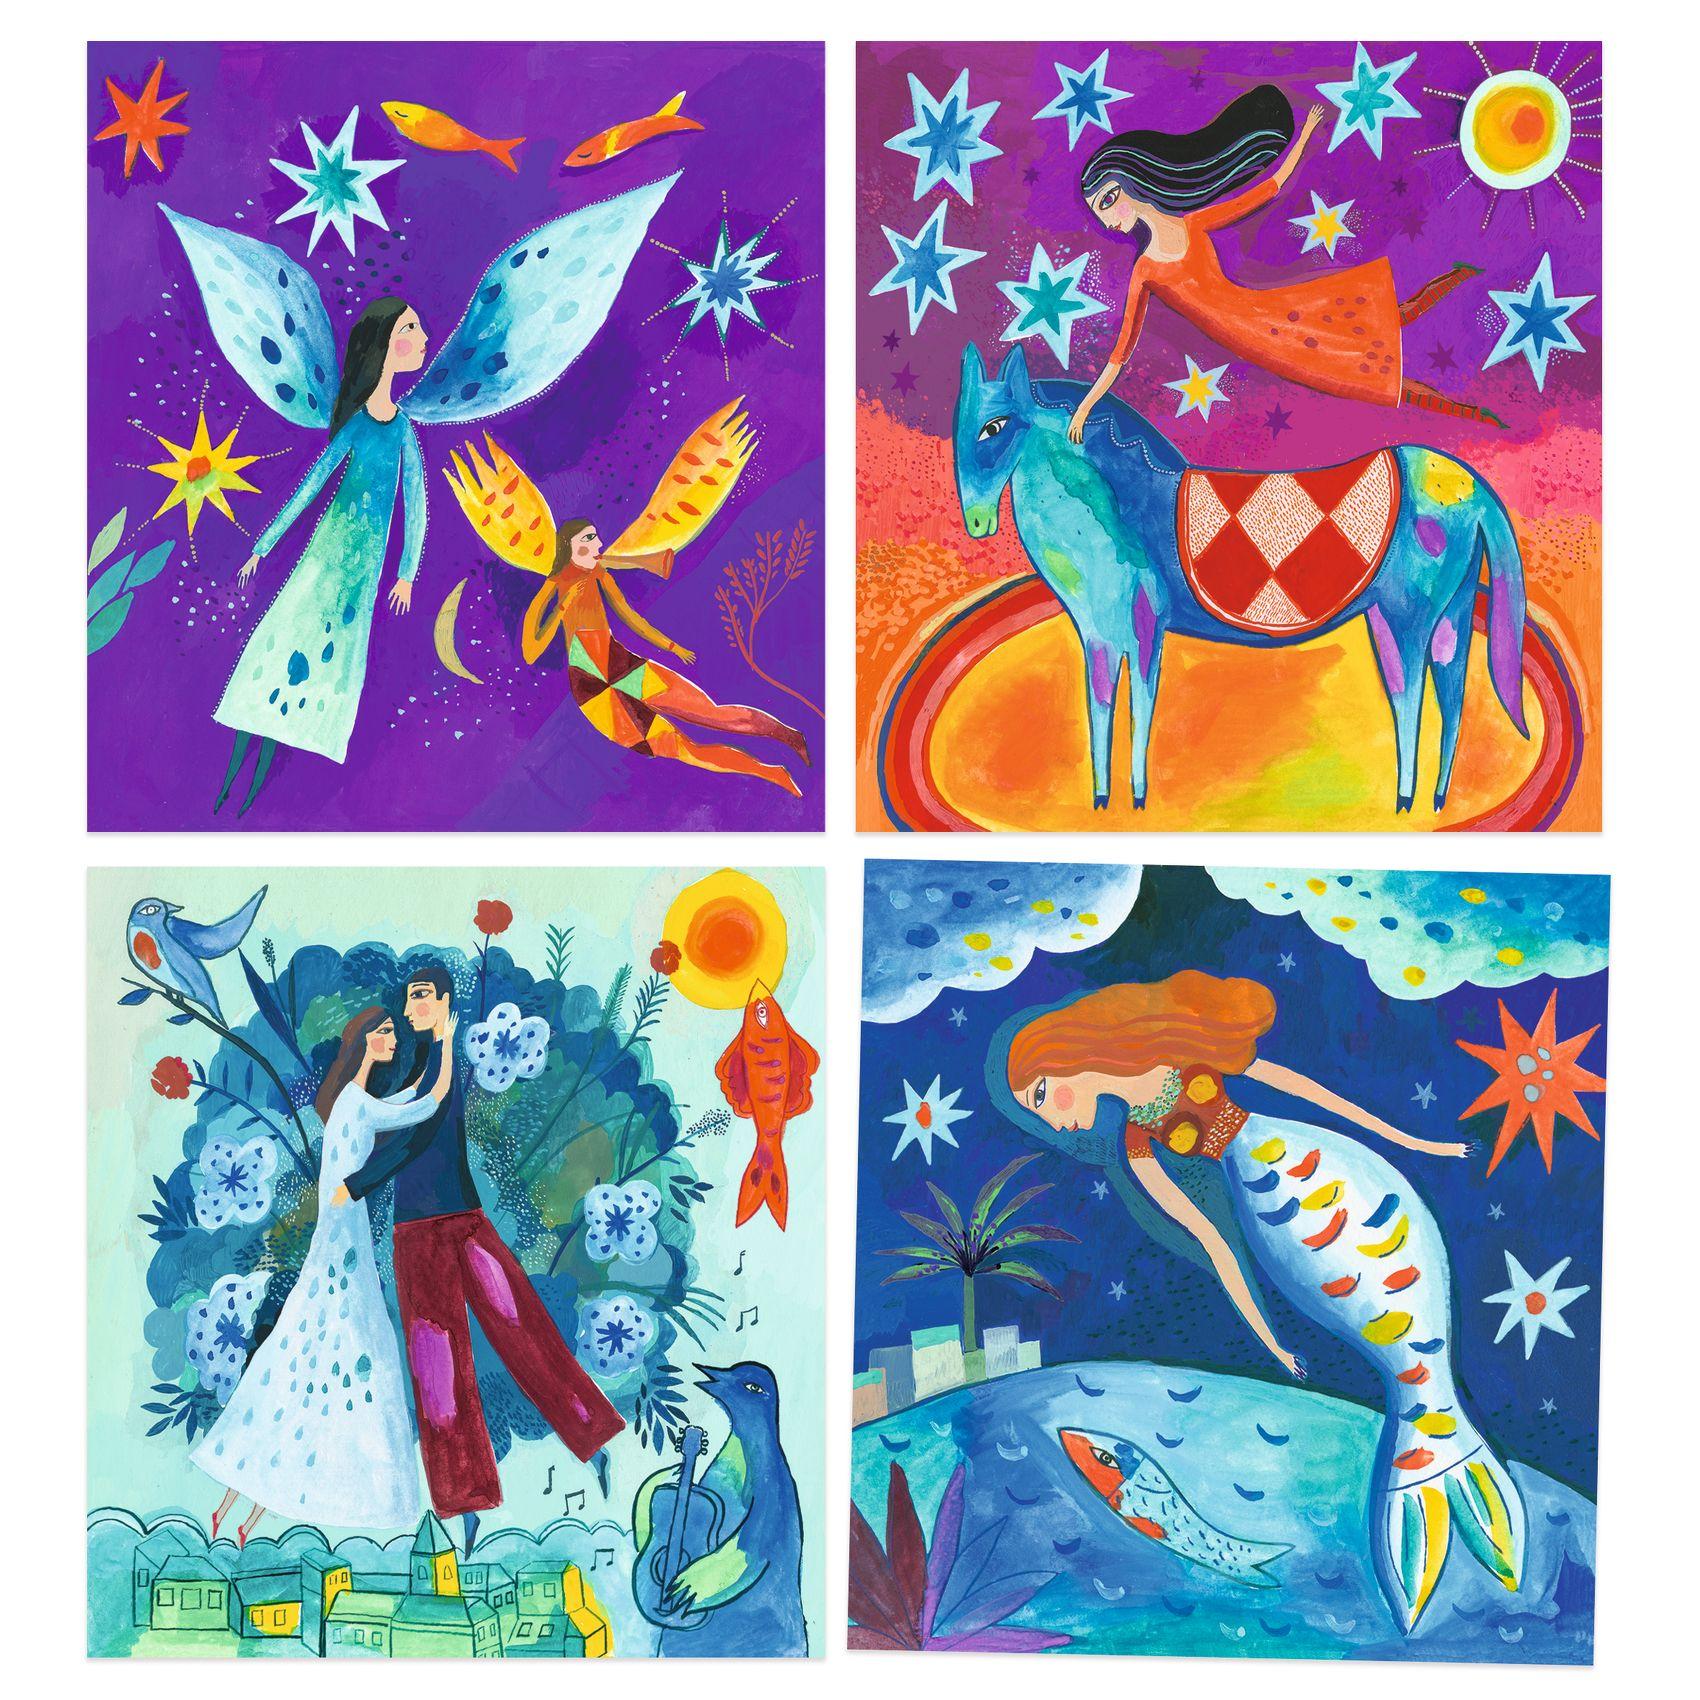 in a dream inspired by Marc Chagall by djeco